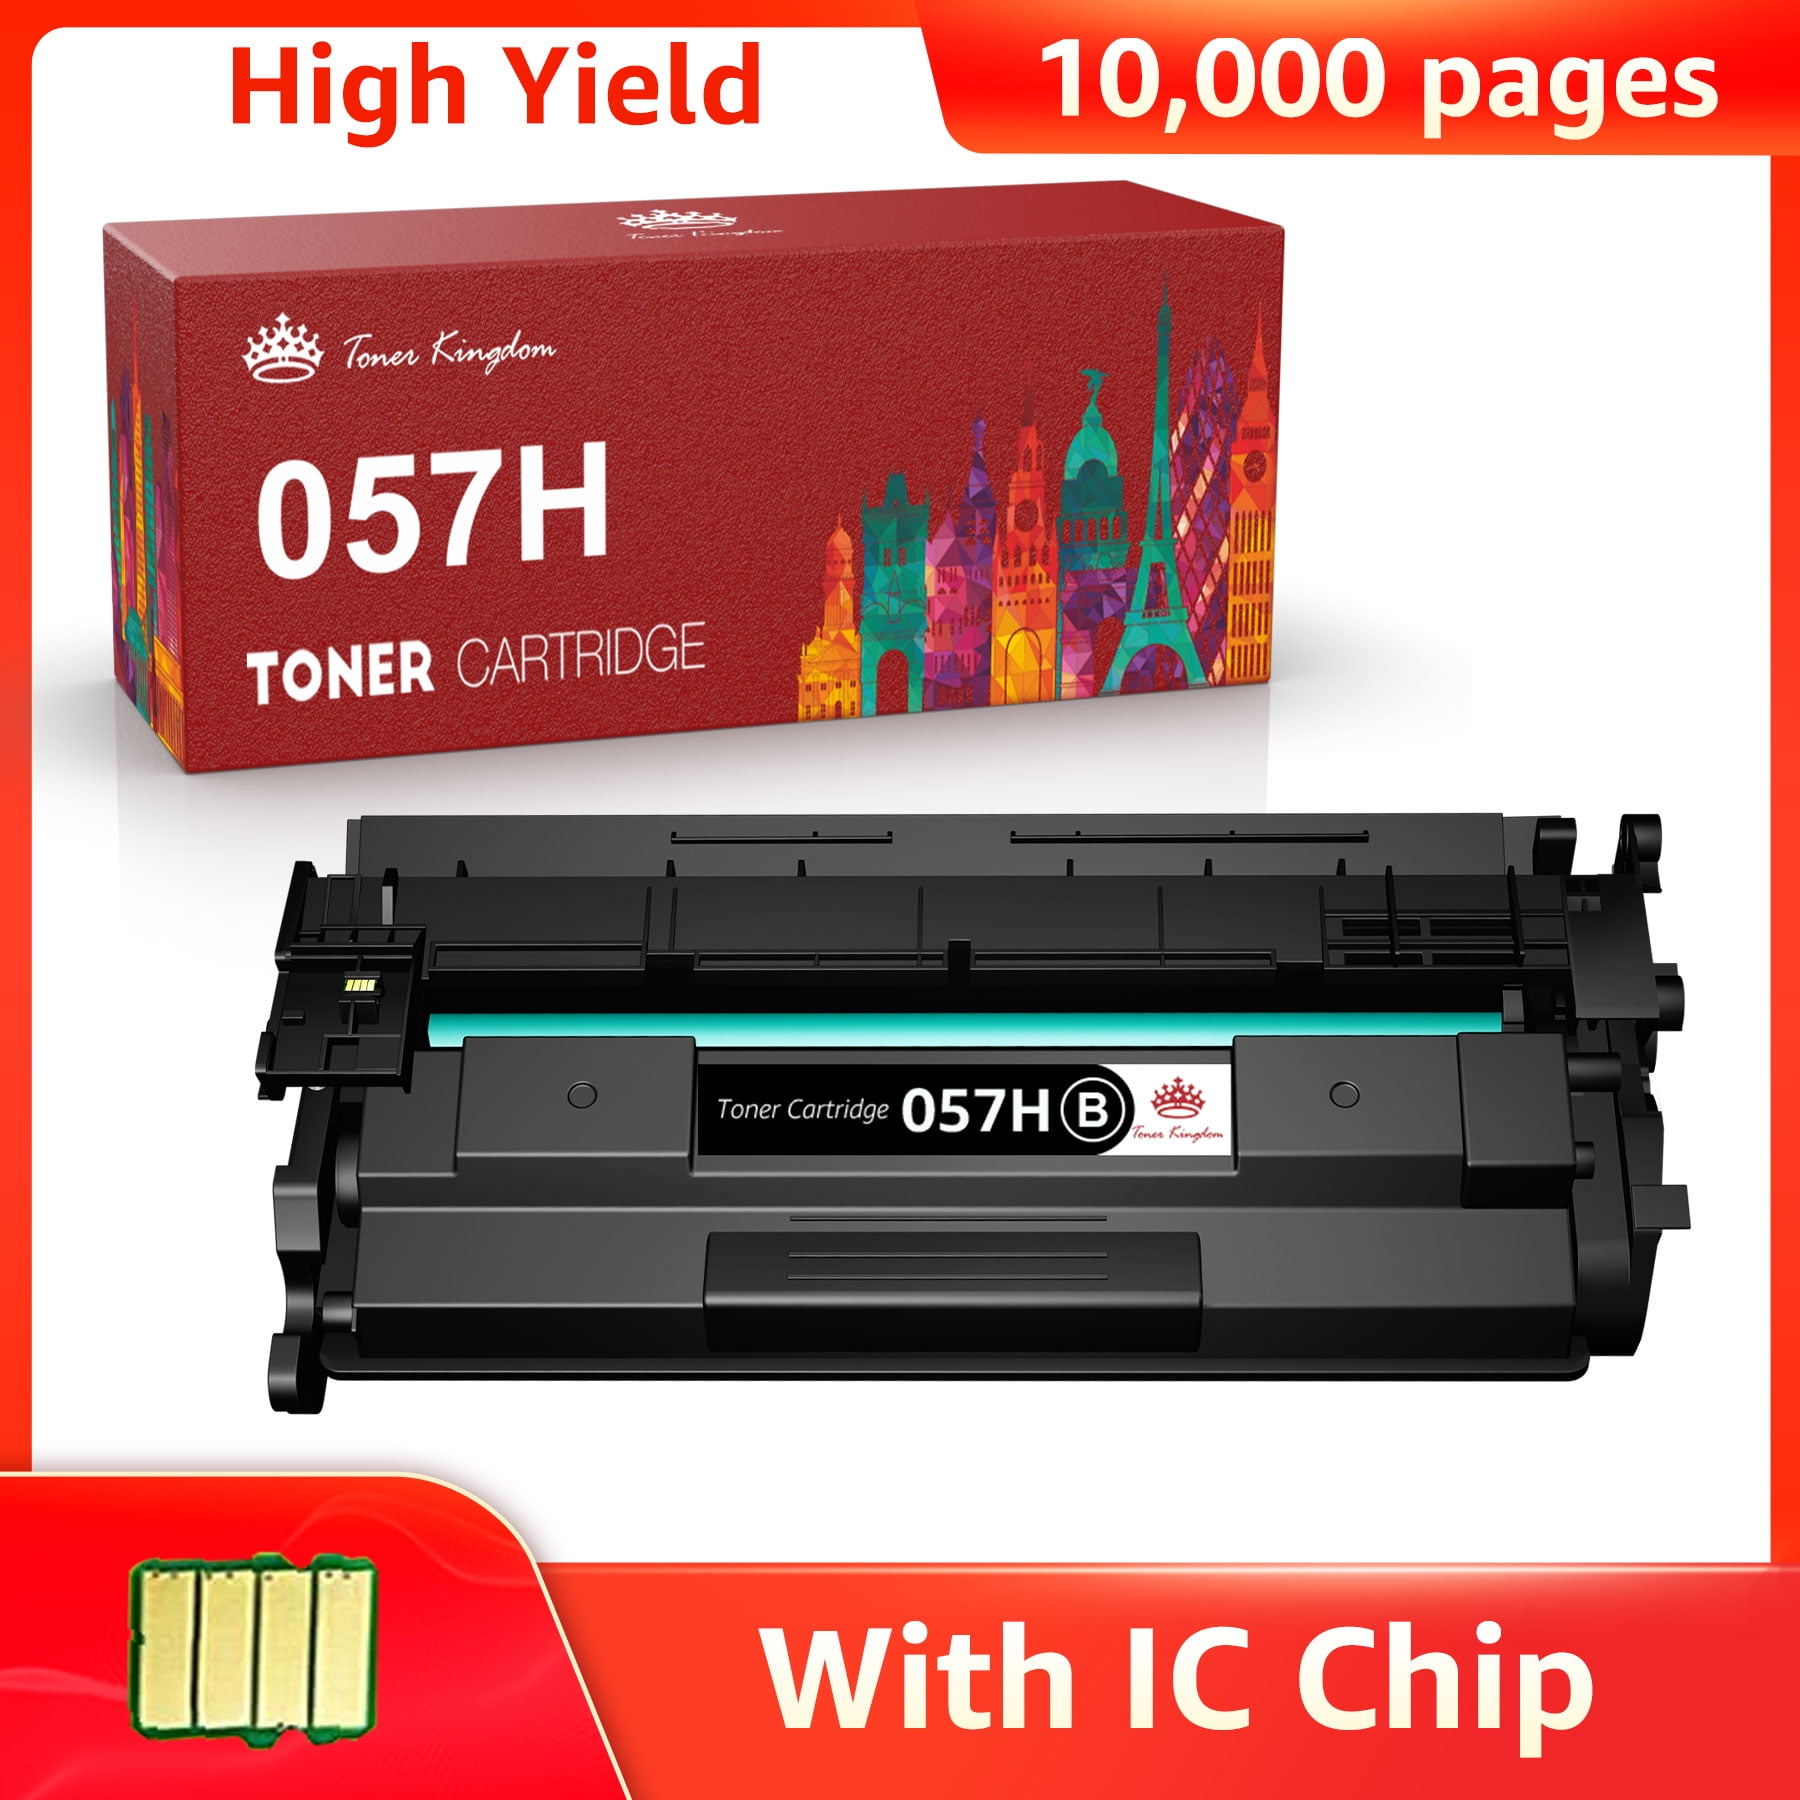  CHENPHON Compatible 057H Toner Cartridge Replacement for Canon  057H 057 Toner 10,000 High Yield for imageCLASS MF445dw MF448dw MF449dw  MF455dw LBP226dw LBP227dw LBP228dw LBP236dw Printer 1-Pack Black : Office  Products